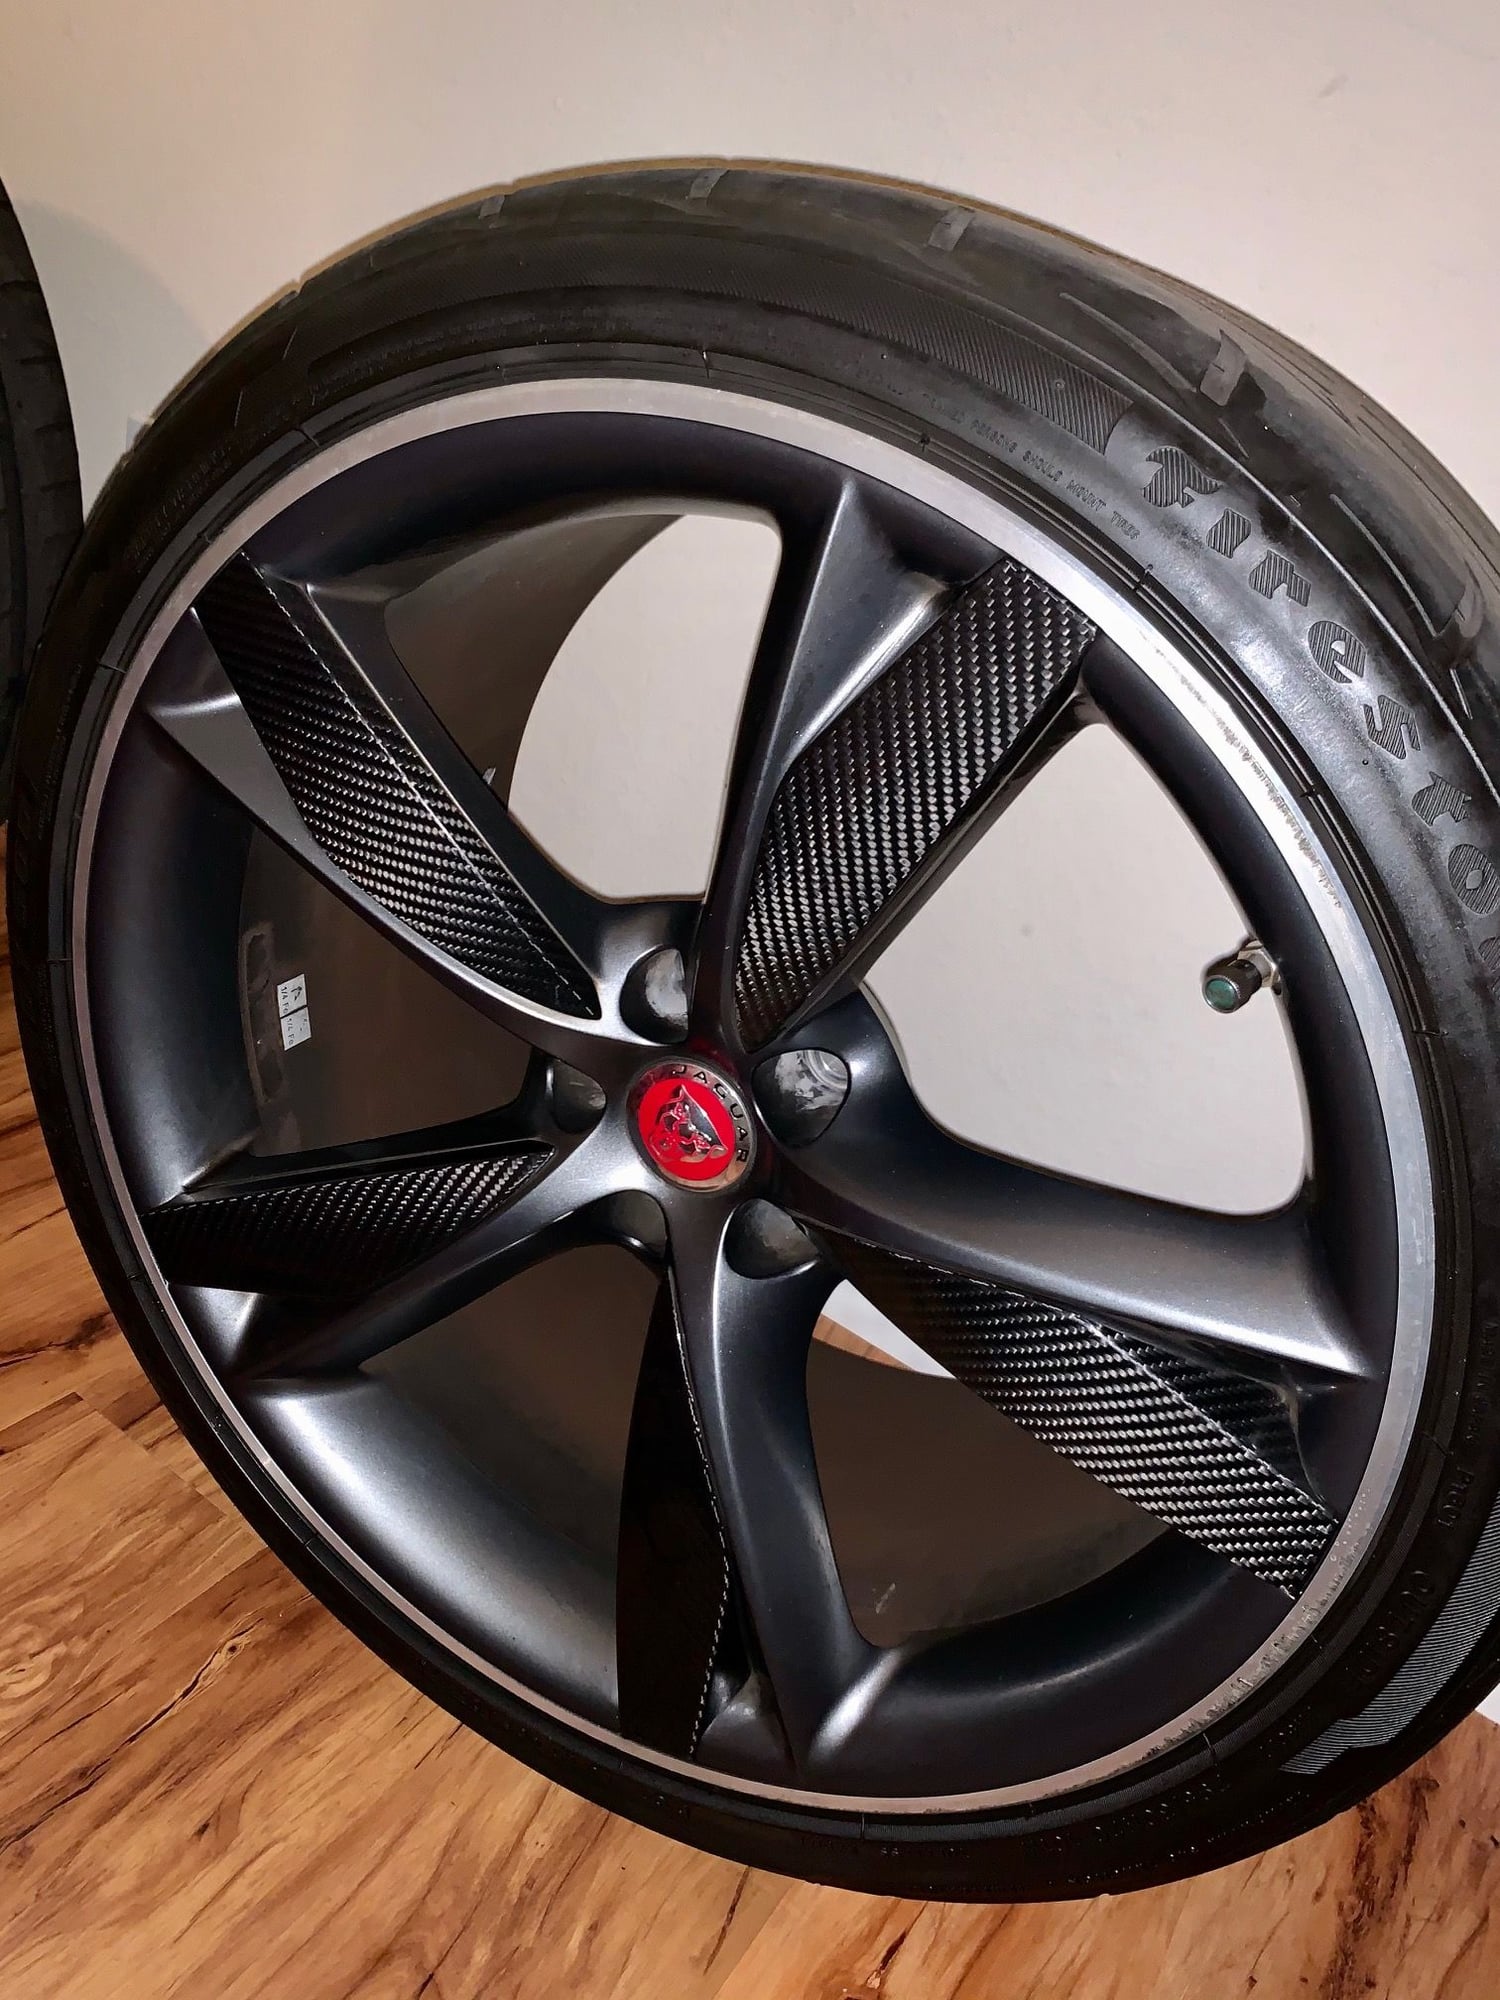 Wheels and Tires/Axles - 20" Carbon Fiber Blade Wheel Set For Sale! - Used - 2014 to 2020 Jaguar F-Type - Newport Beach, CA 92663, United States